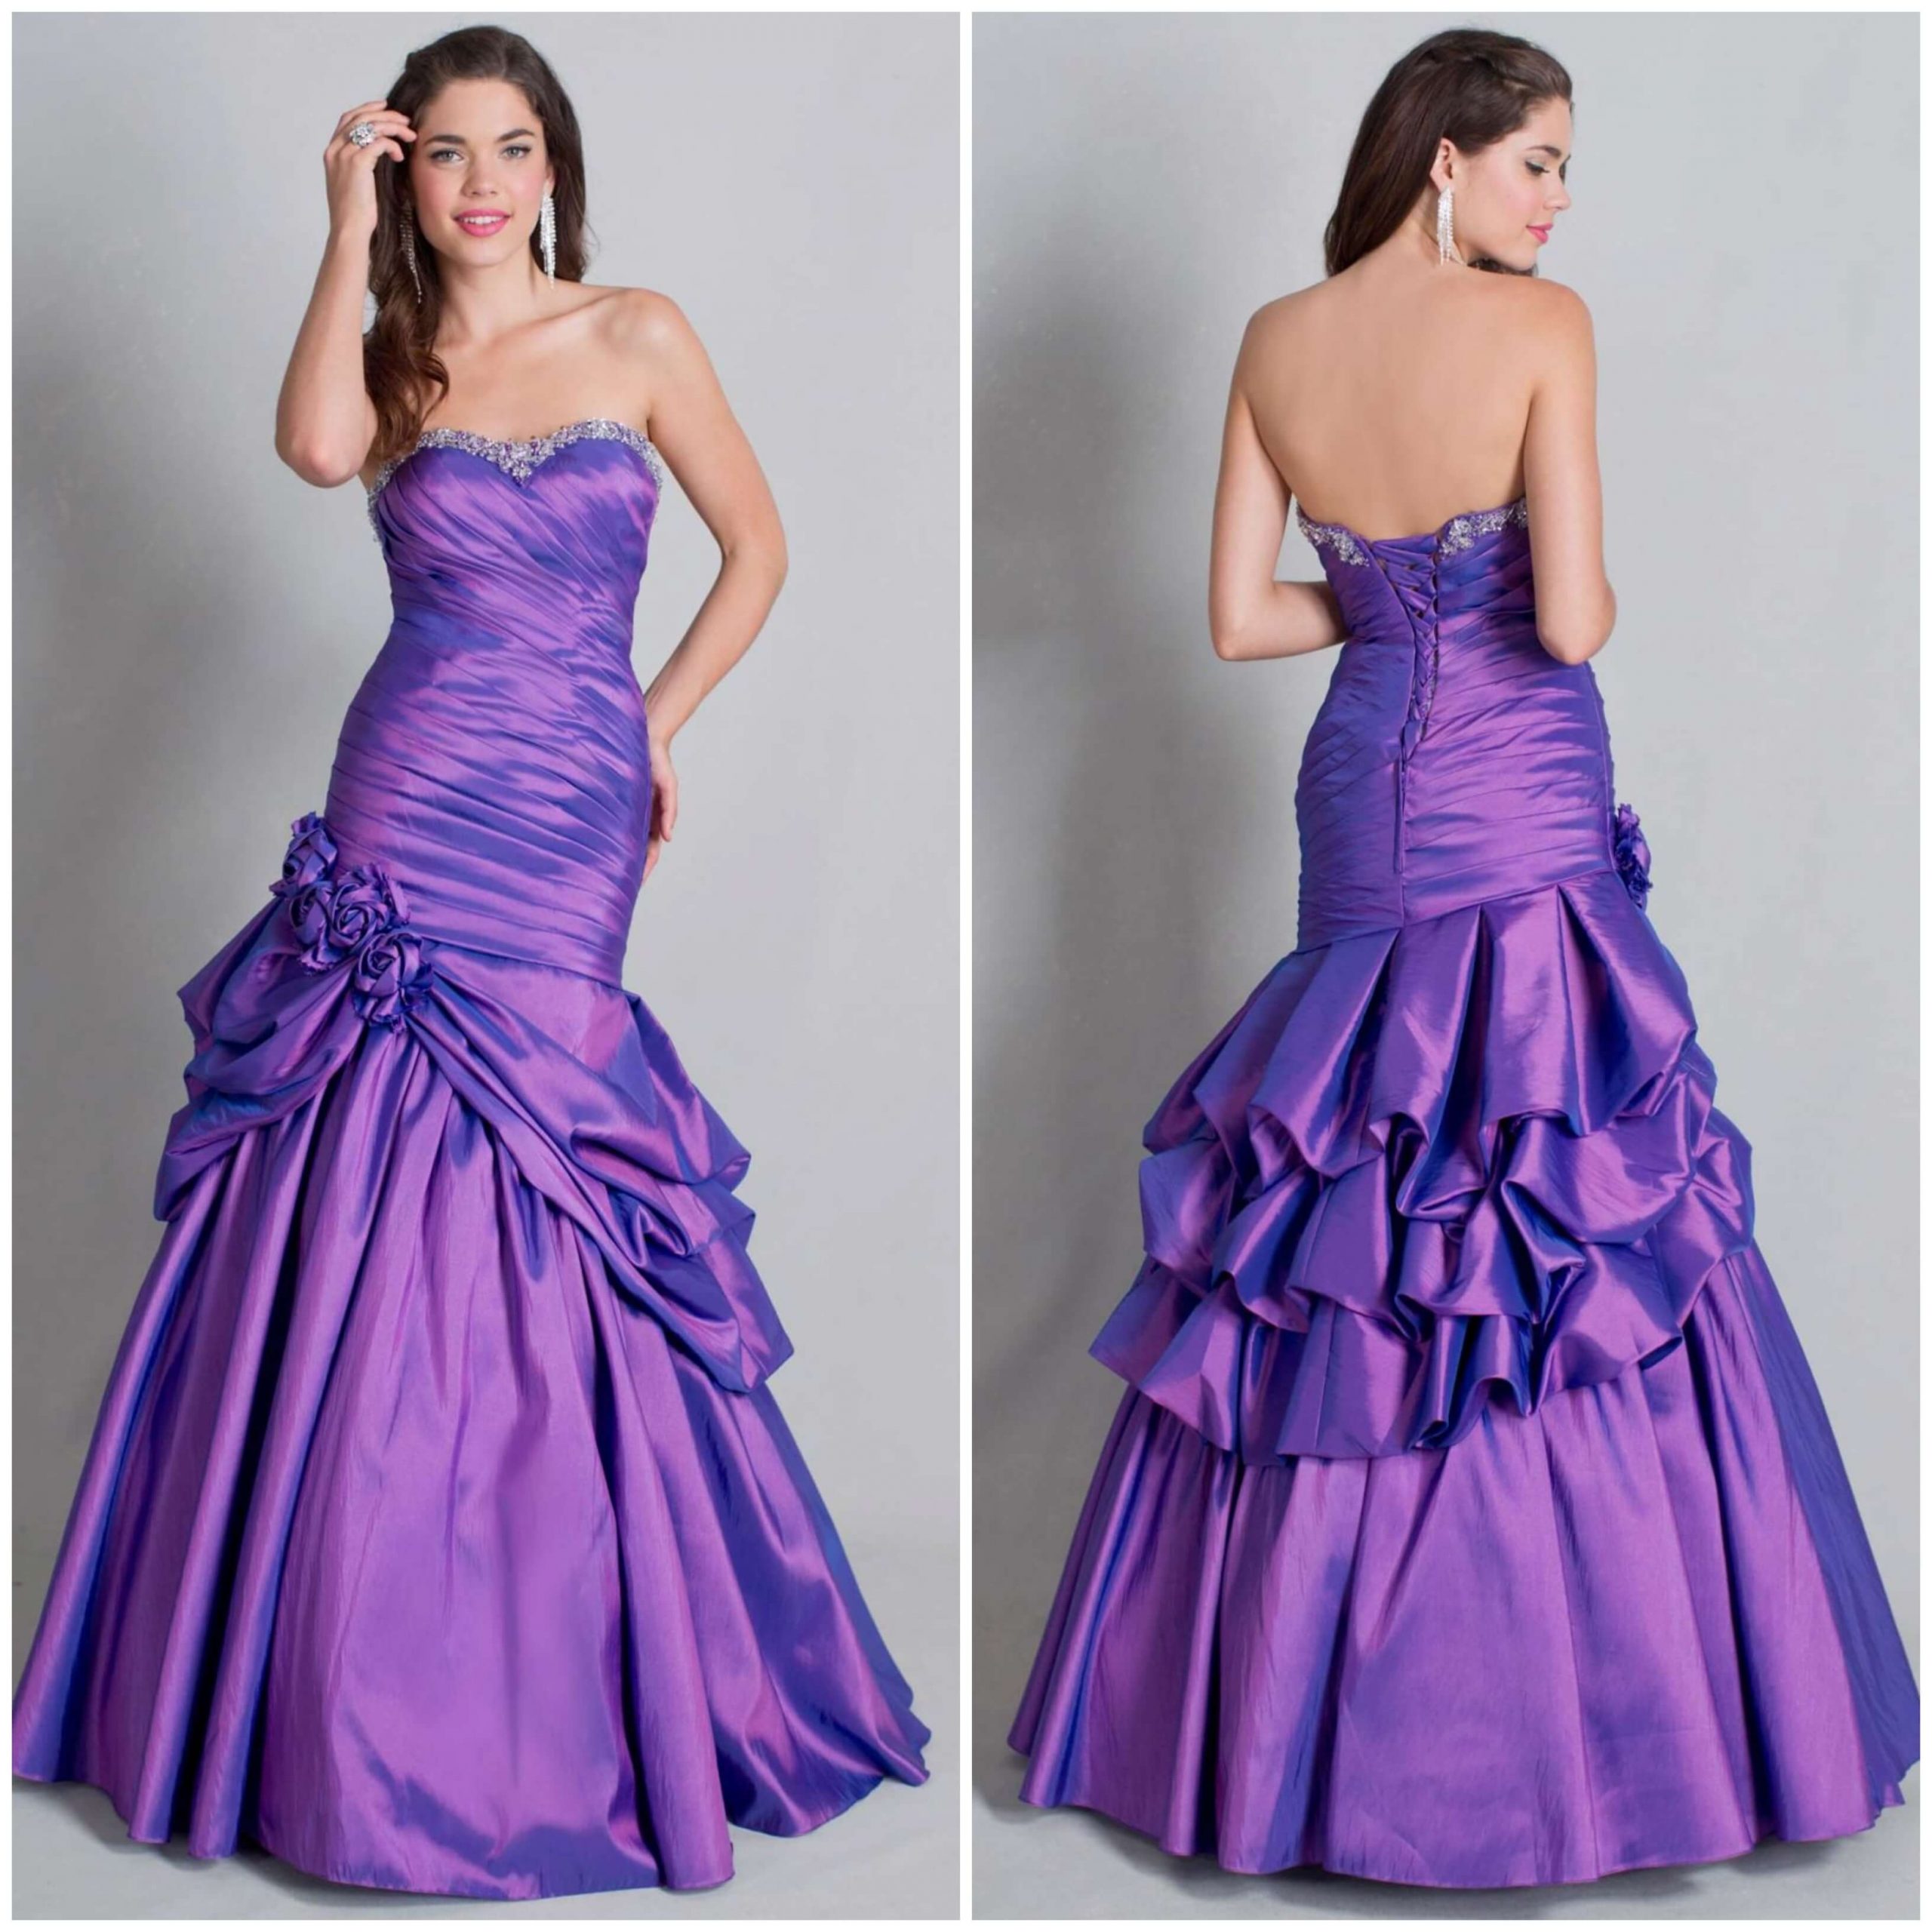 Aarika Wolf Purple Gown – Photoshoot for Private Label By G Collection - 5